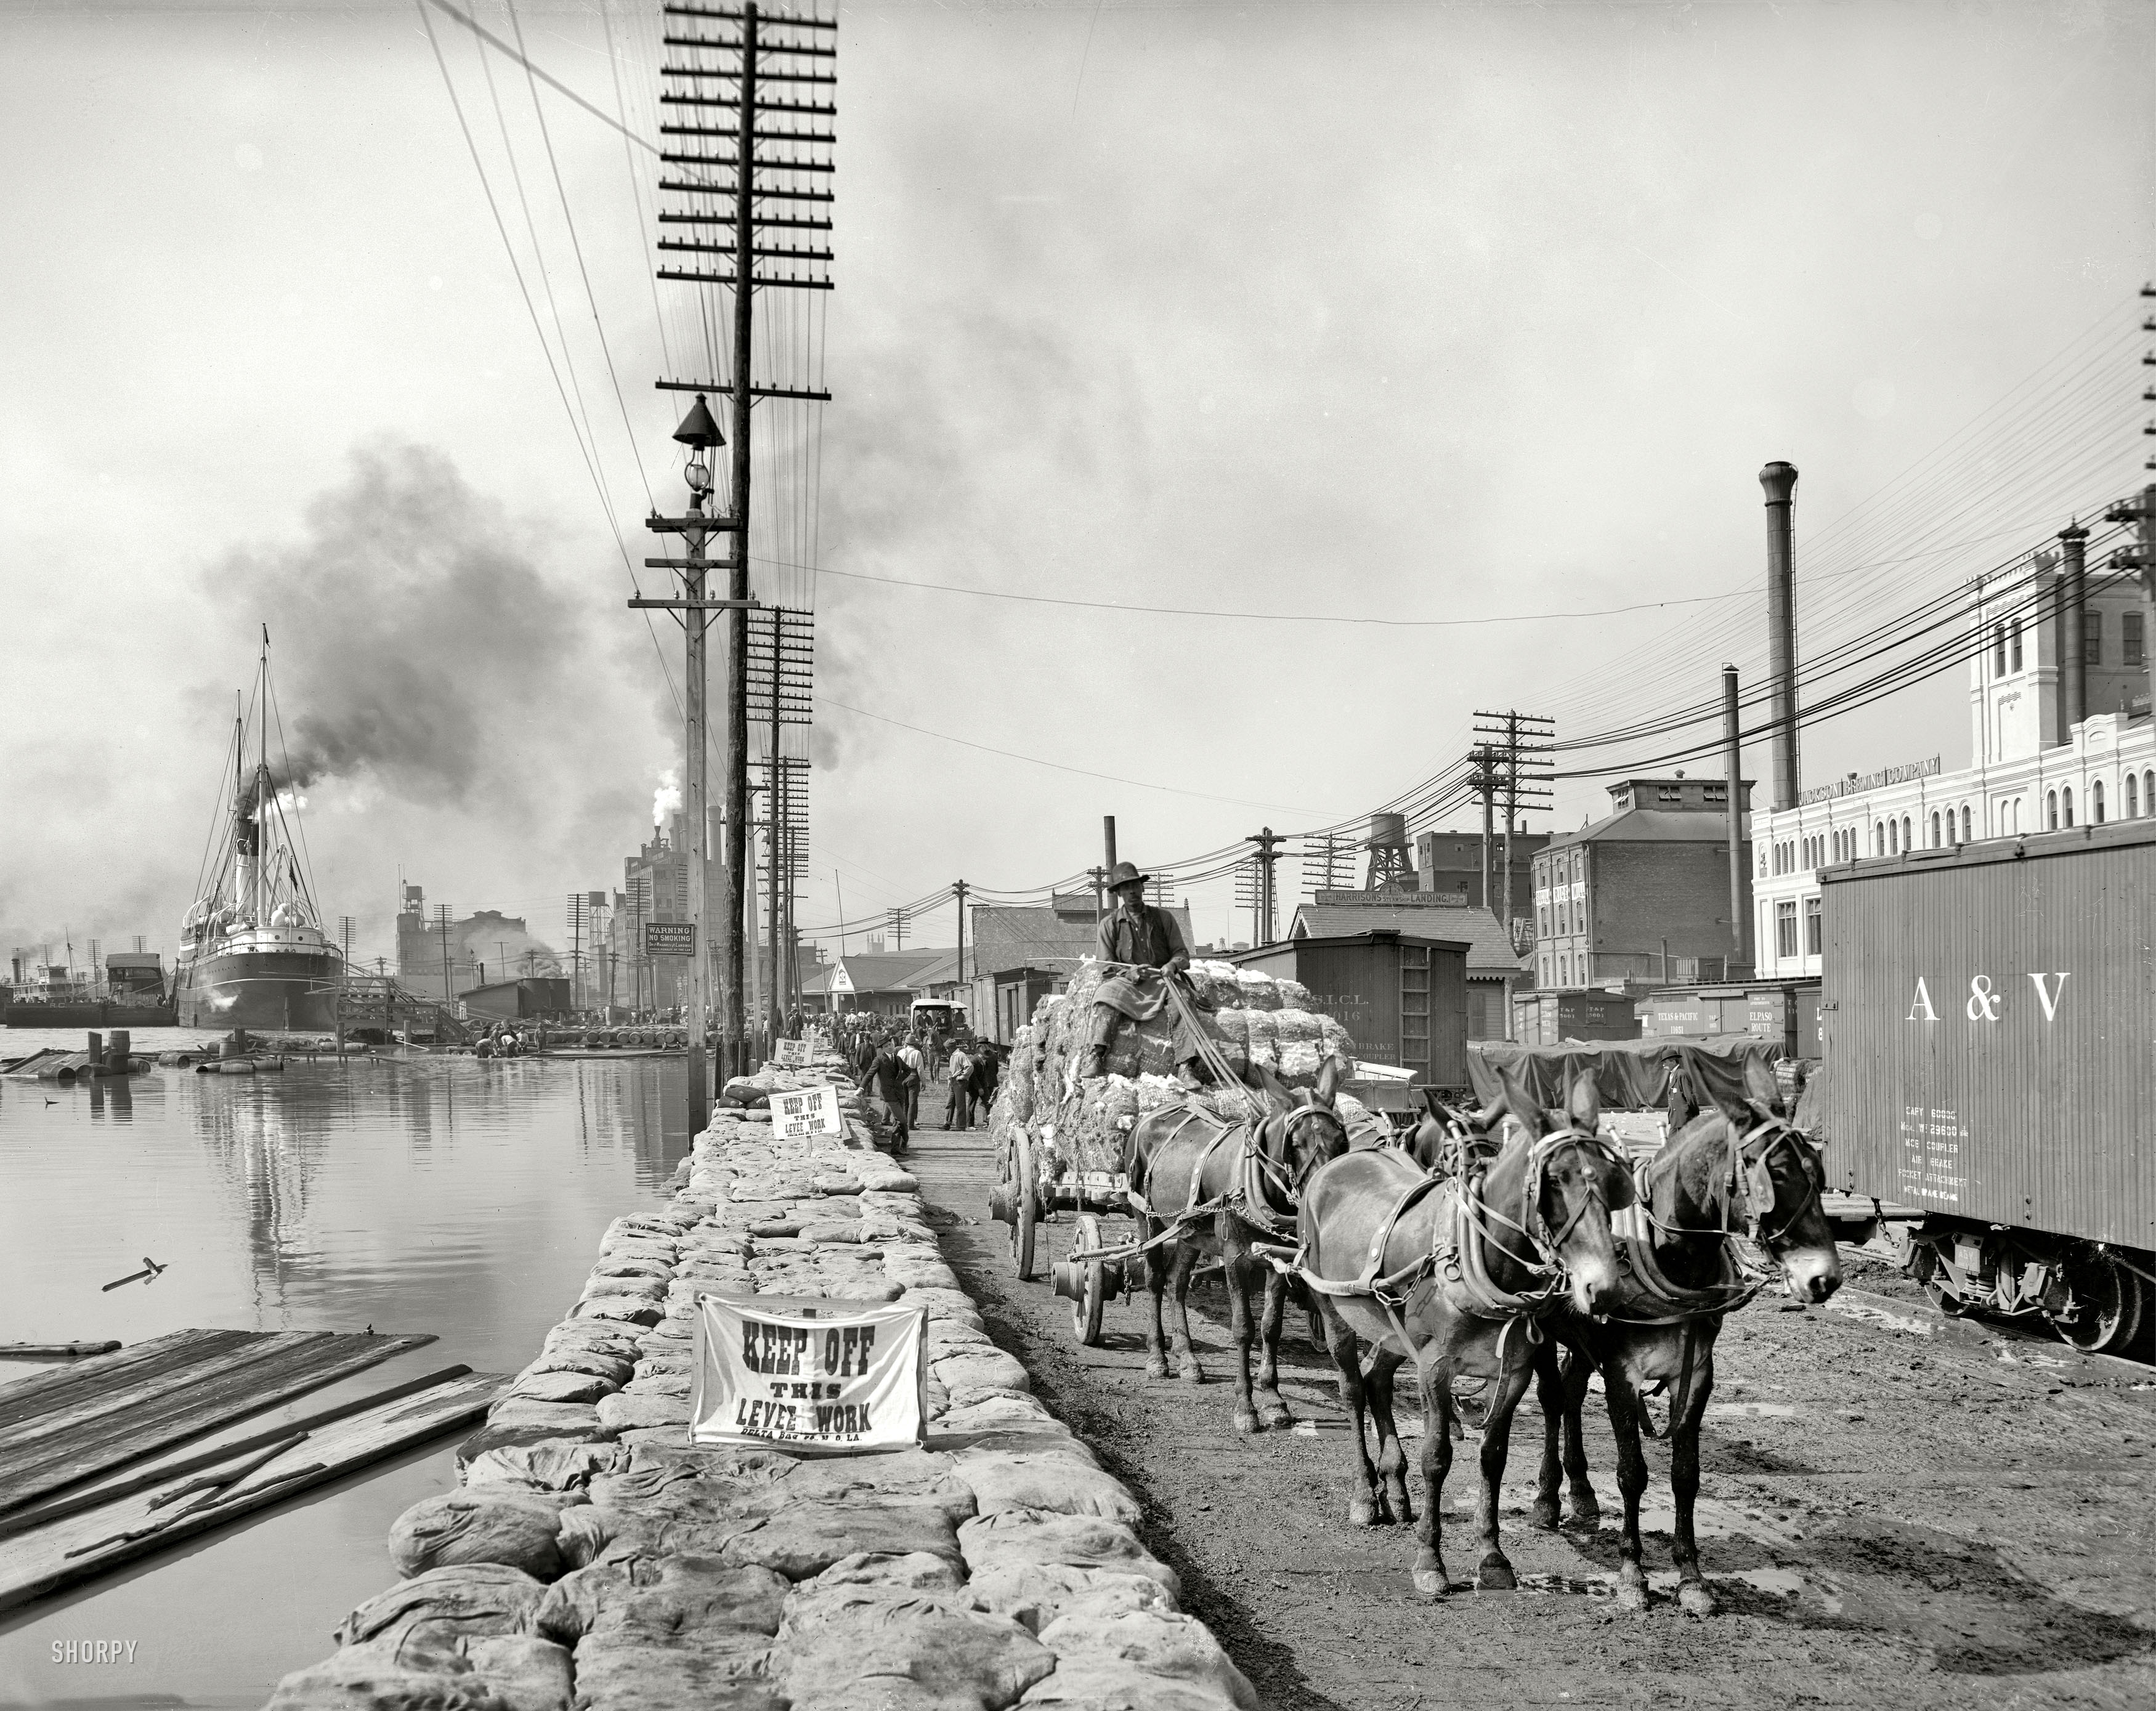 New Orleans, Louisiana, circa 1903. "Mule teams on the levee." 8x10 inch dry plate glass negative, Detroit Publishing Company. View full size.